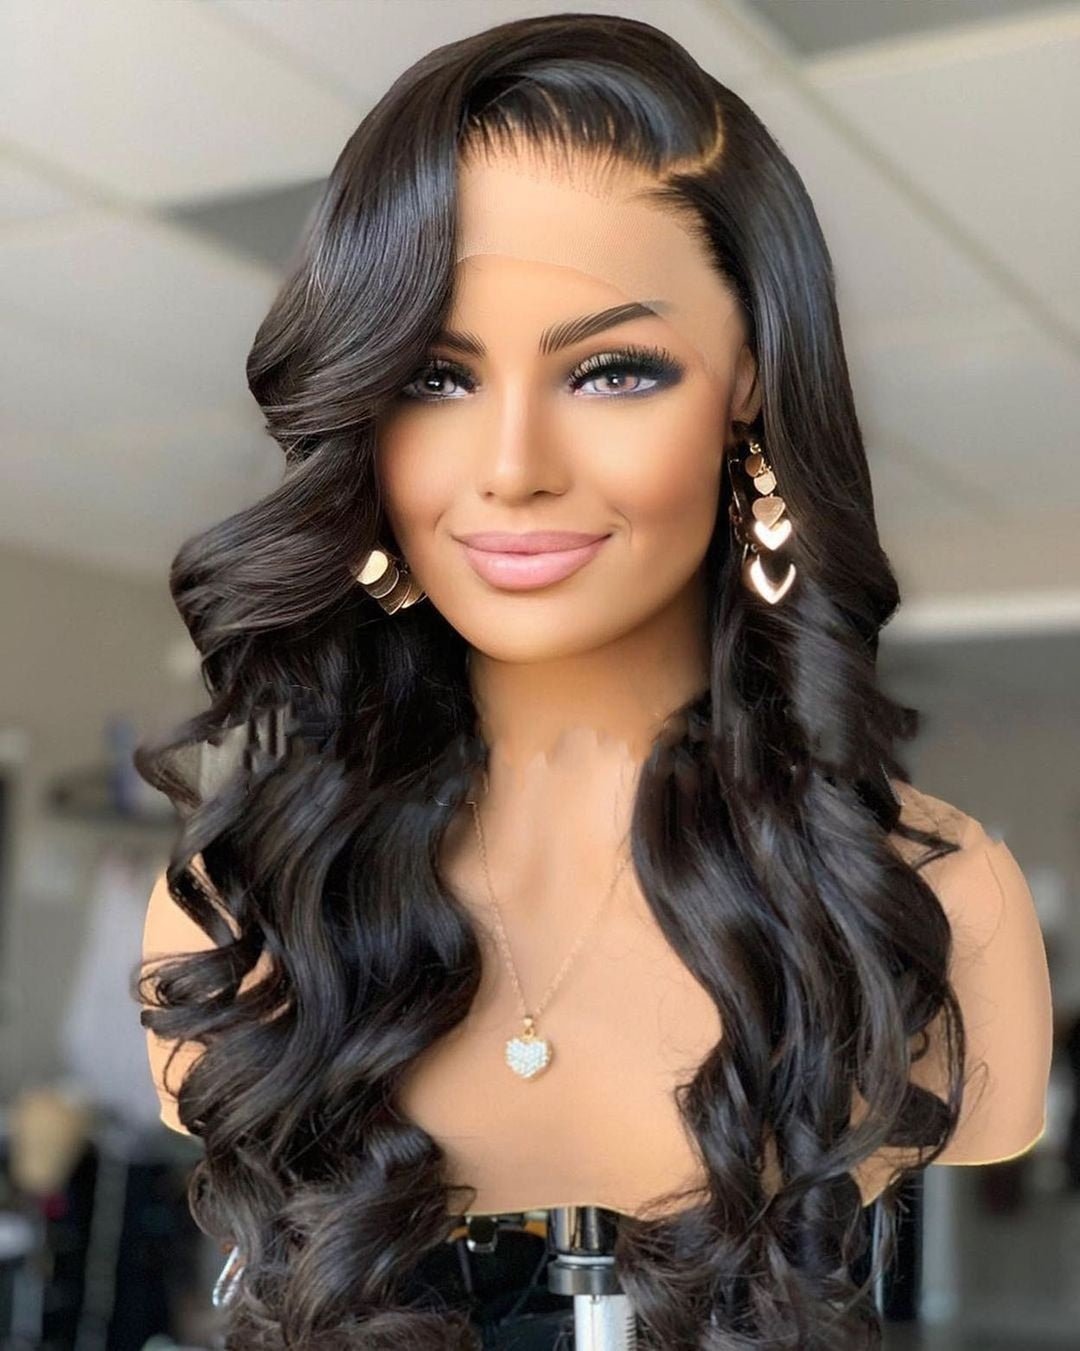 26Inch Long Water Wave Synthetic Lace Front Wigs For Women With Baby Hair Heat Resistant Fiber Hair Daily Wear Wigs 180%Density